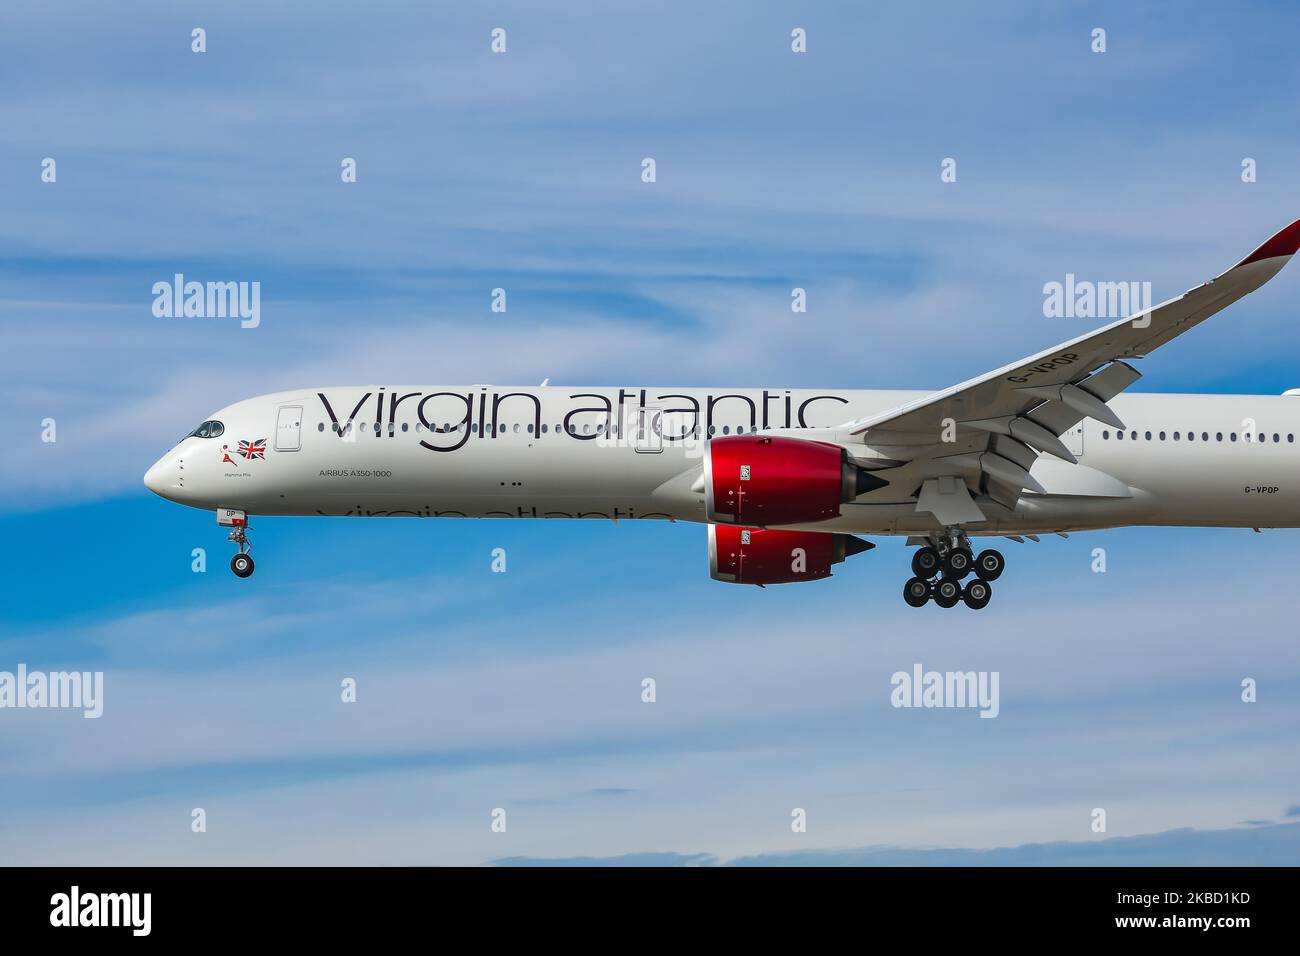 Virgin Atlantic Airways Airbus A350-1000 aircraft as seen on final approach arriving and landing at JFK John F. Kennedy International Airport in NYC, New York, USA. The airplane has the registration G-VPOP, the name Mamma Mia, 2x RR Jet engines. Virgin Atlantic Airways VS VIR is a British Airline Carrier connecting New York City to the London Gatwick, London Heathrow and Manchester UK. (Photo by Nicolas Economou/NurPhoto) Stock Photo